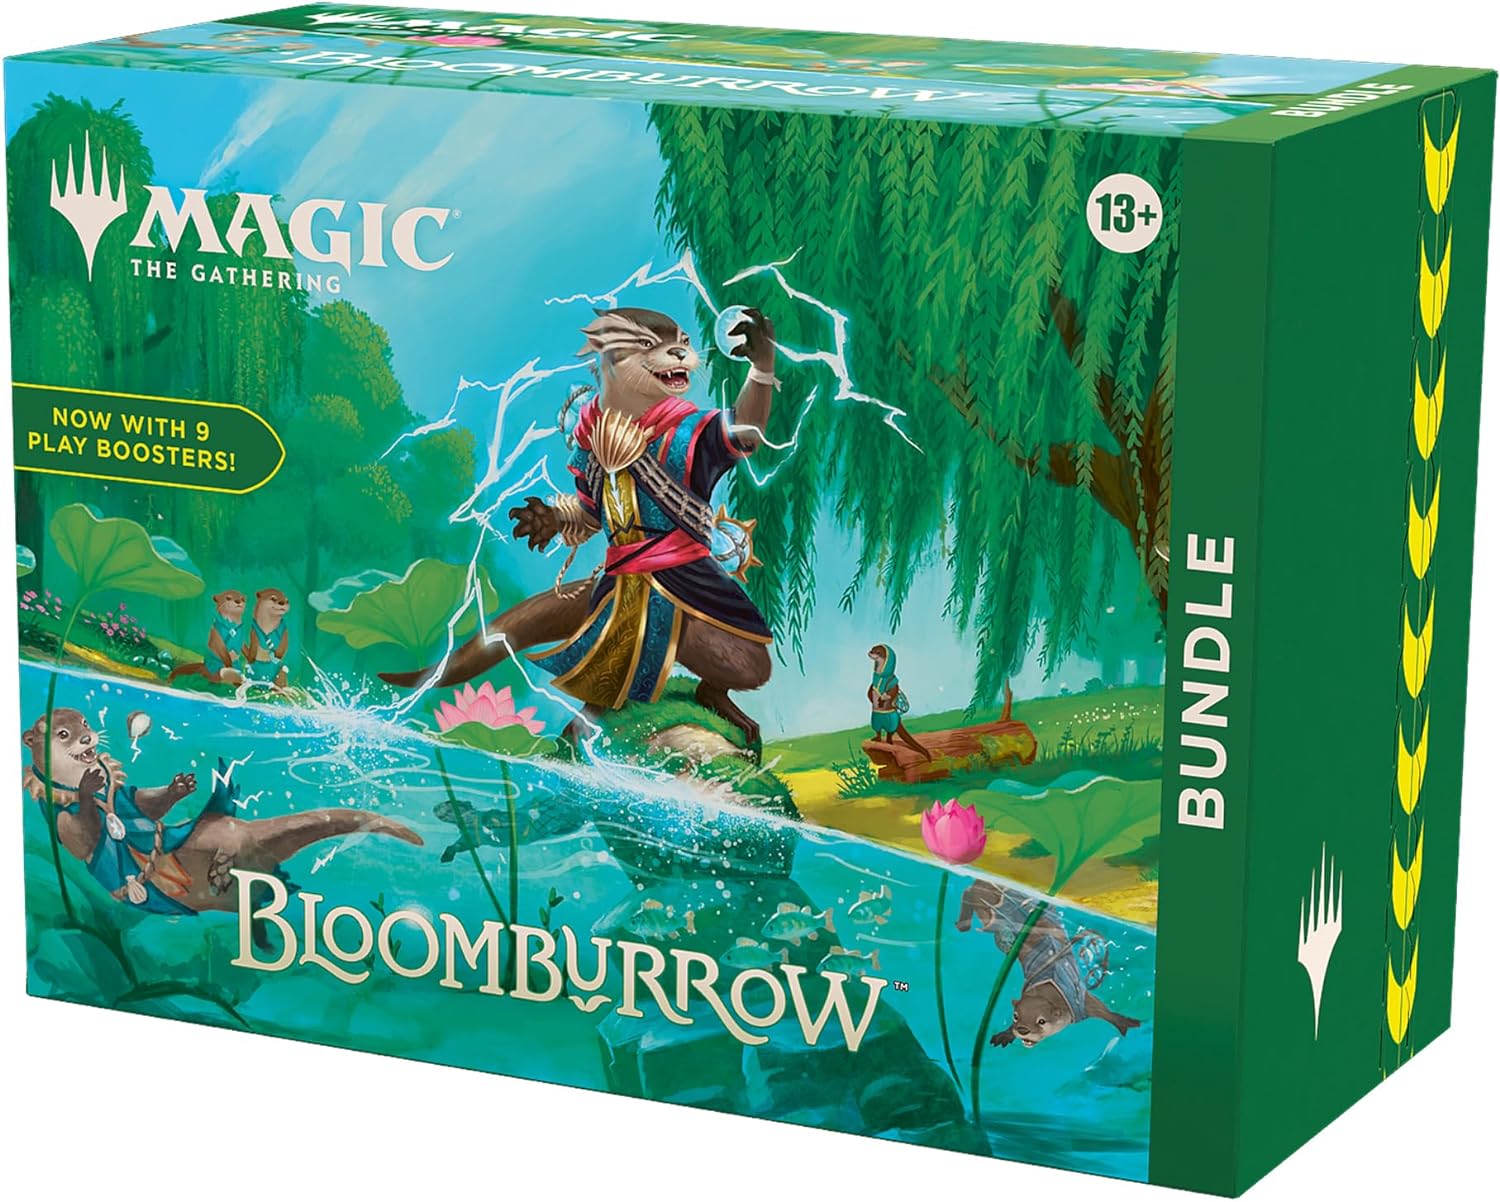 PRE-ORDER: Bloomburrow Bundle - 9 Play Boosters, 30 Land cards + Exclusive Accessories. Magic: The Gathering, Trading Cards made by Magic The Gathering. Exit 23 Games 